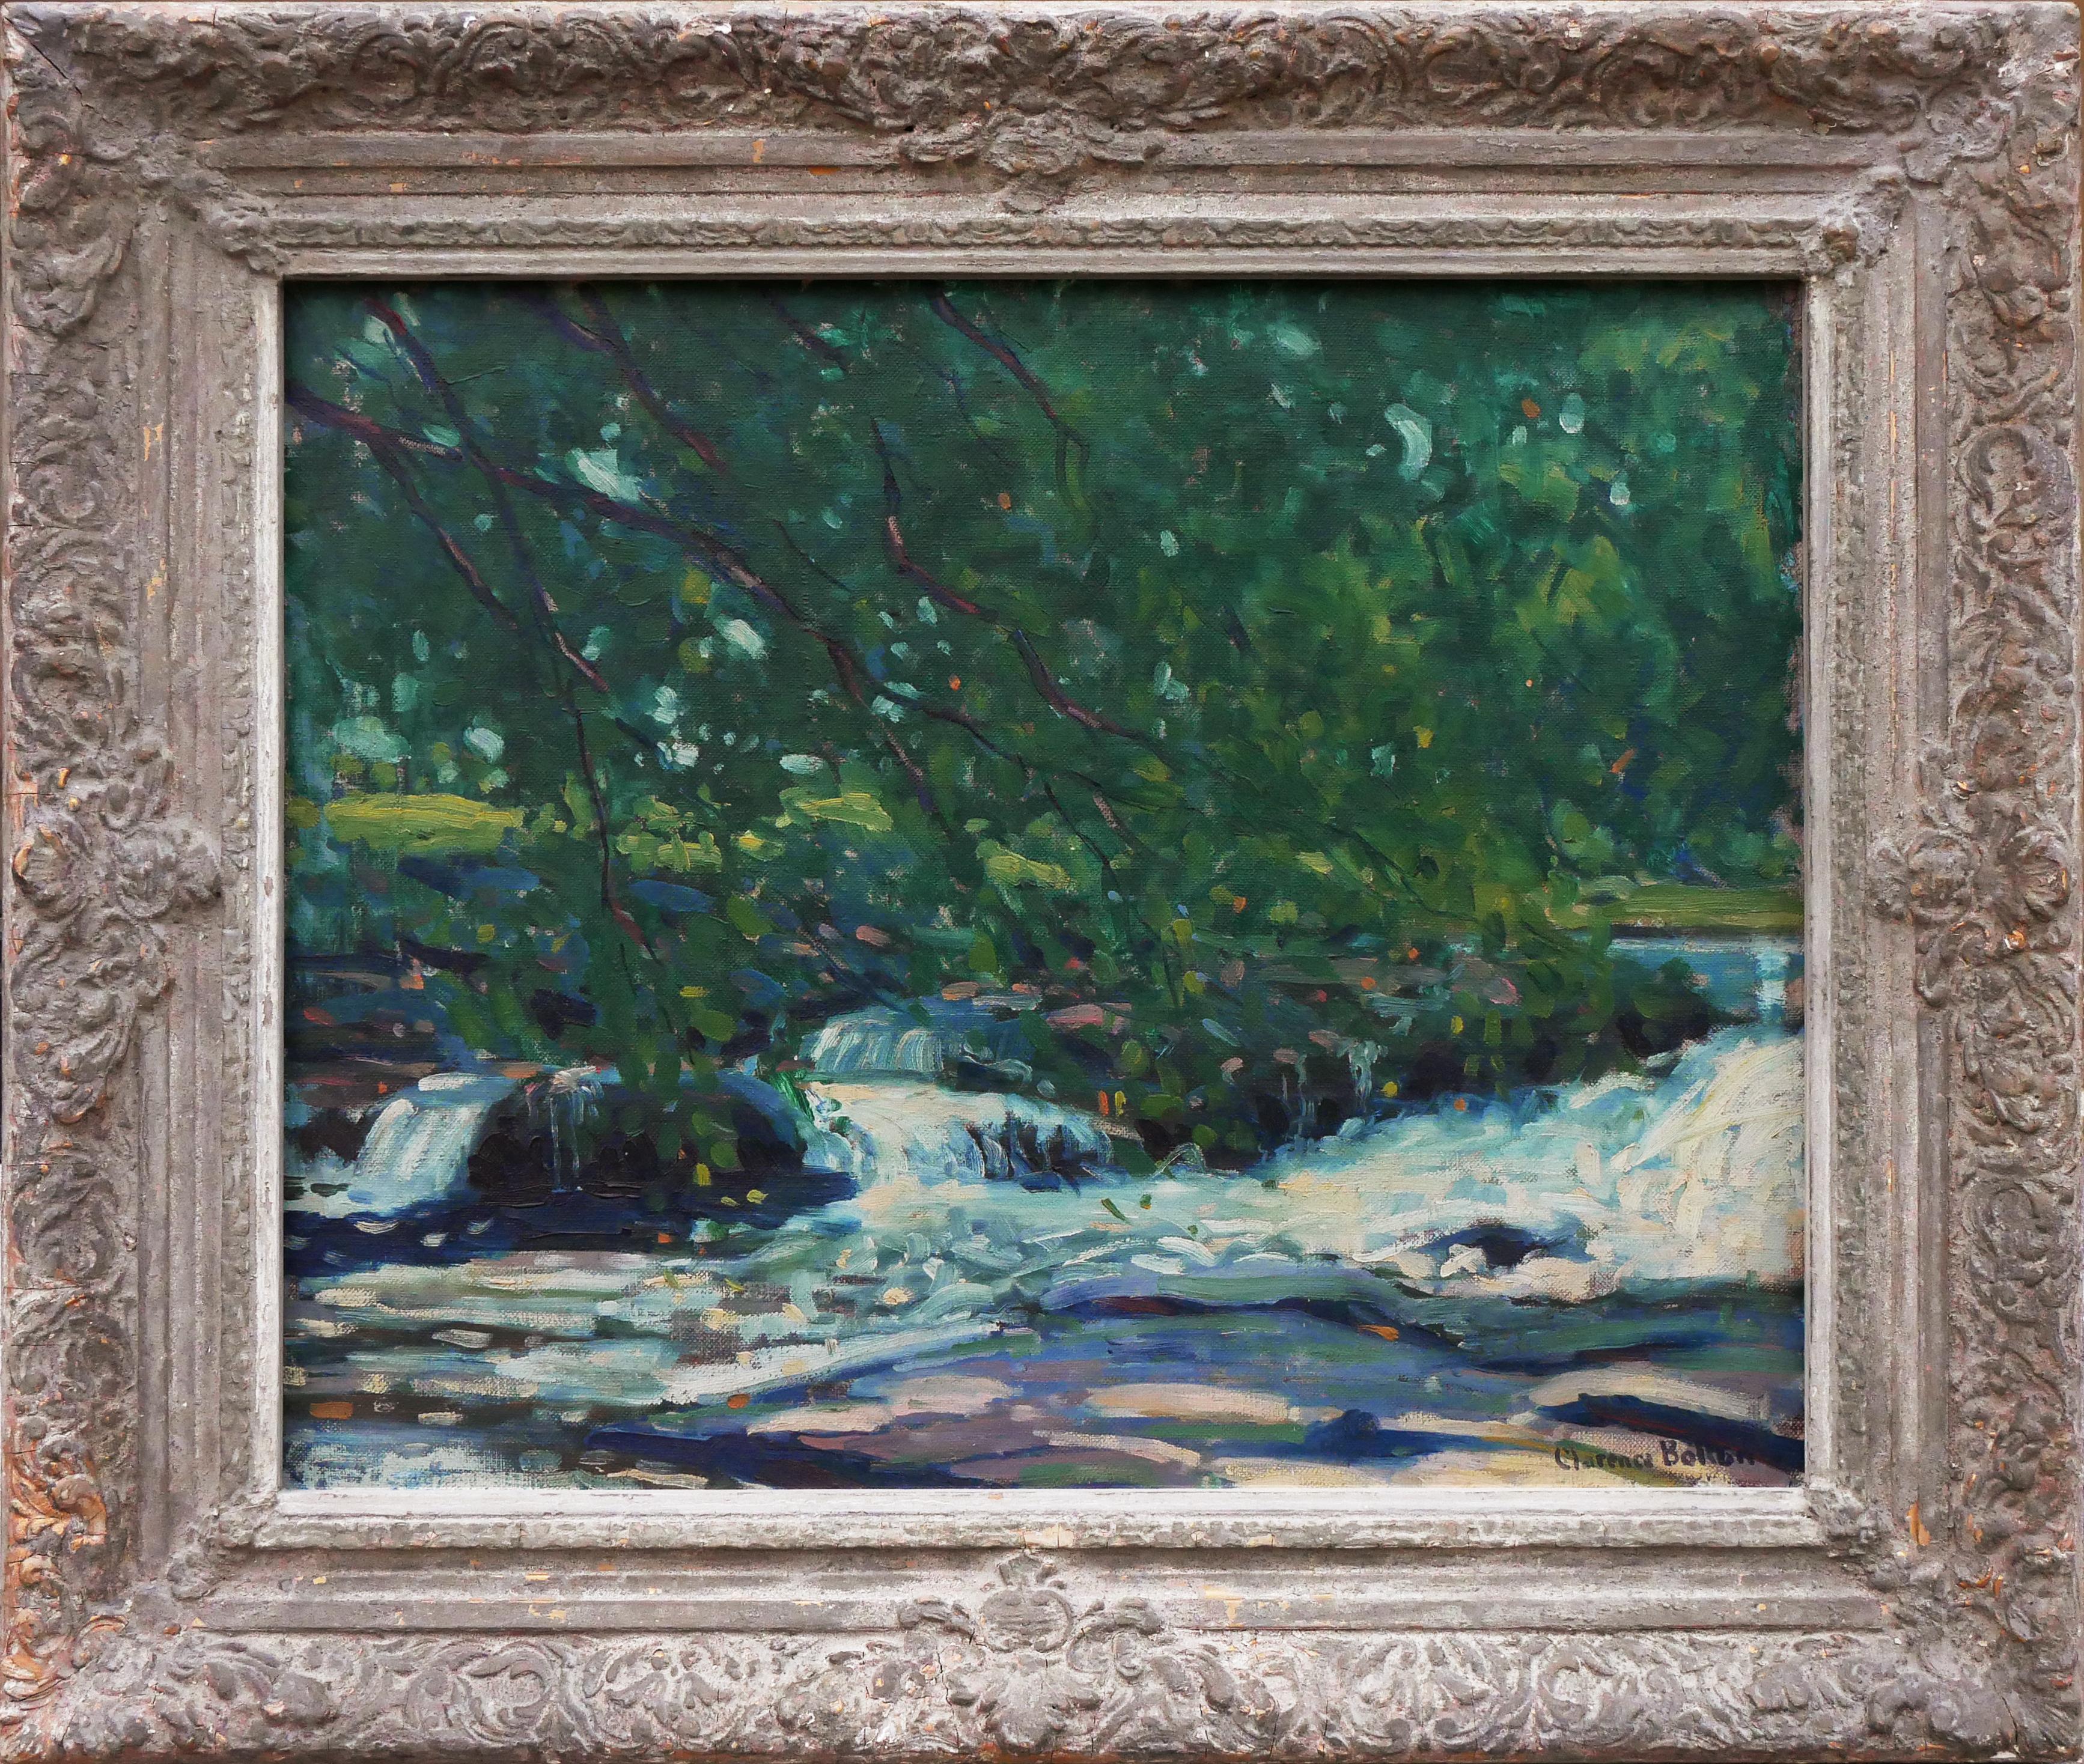 Clarence Bolton Landscape Painting - "The Brook" Green and Blue Abstract Impressionist Waterscape Painting